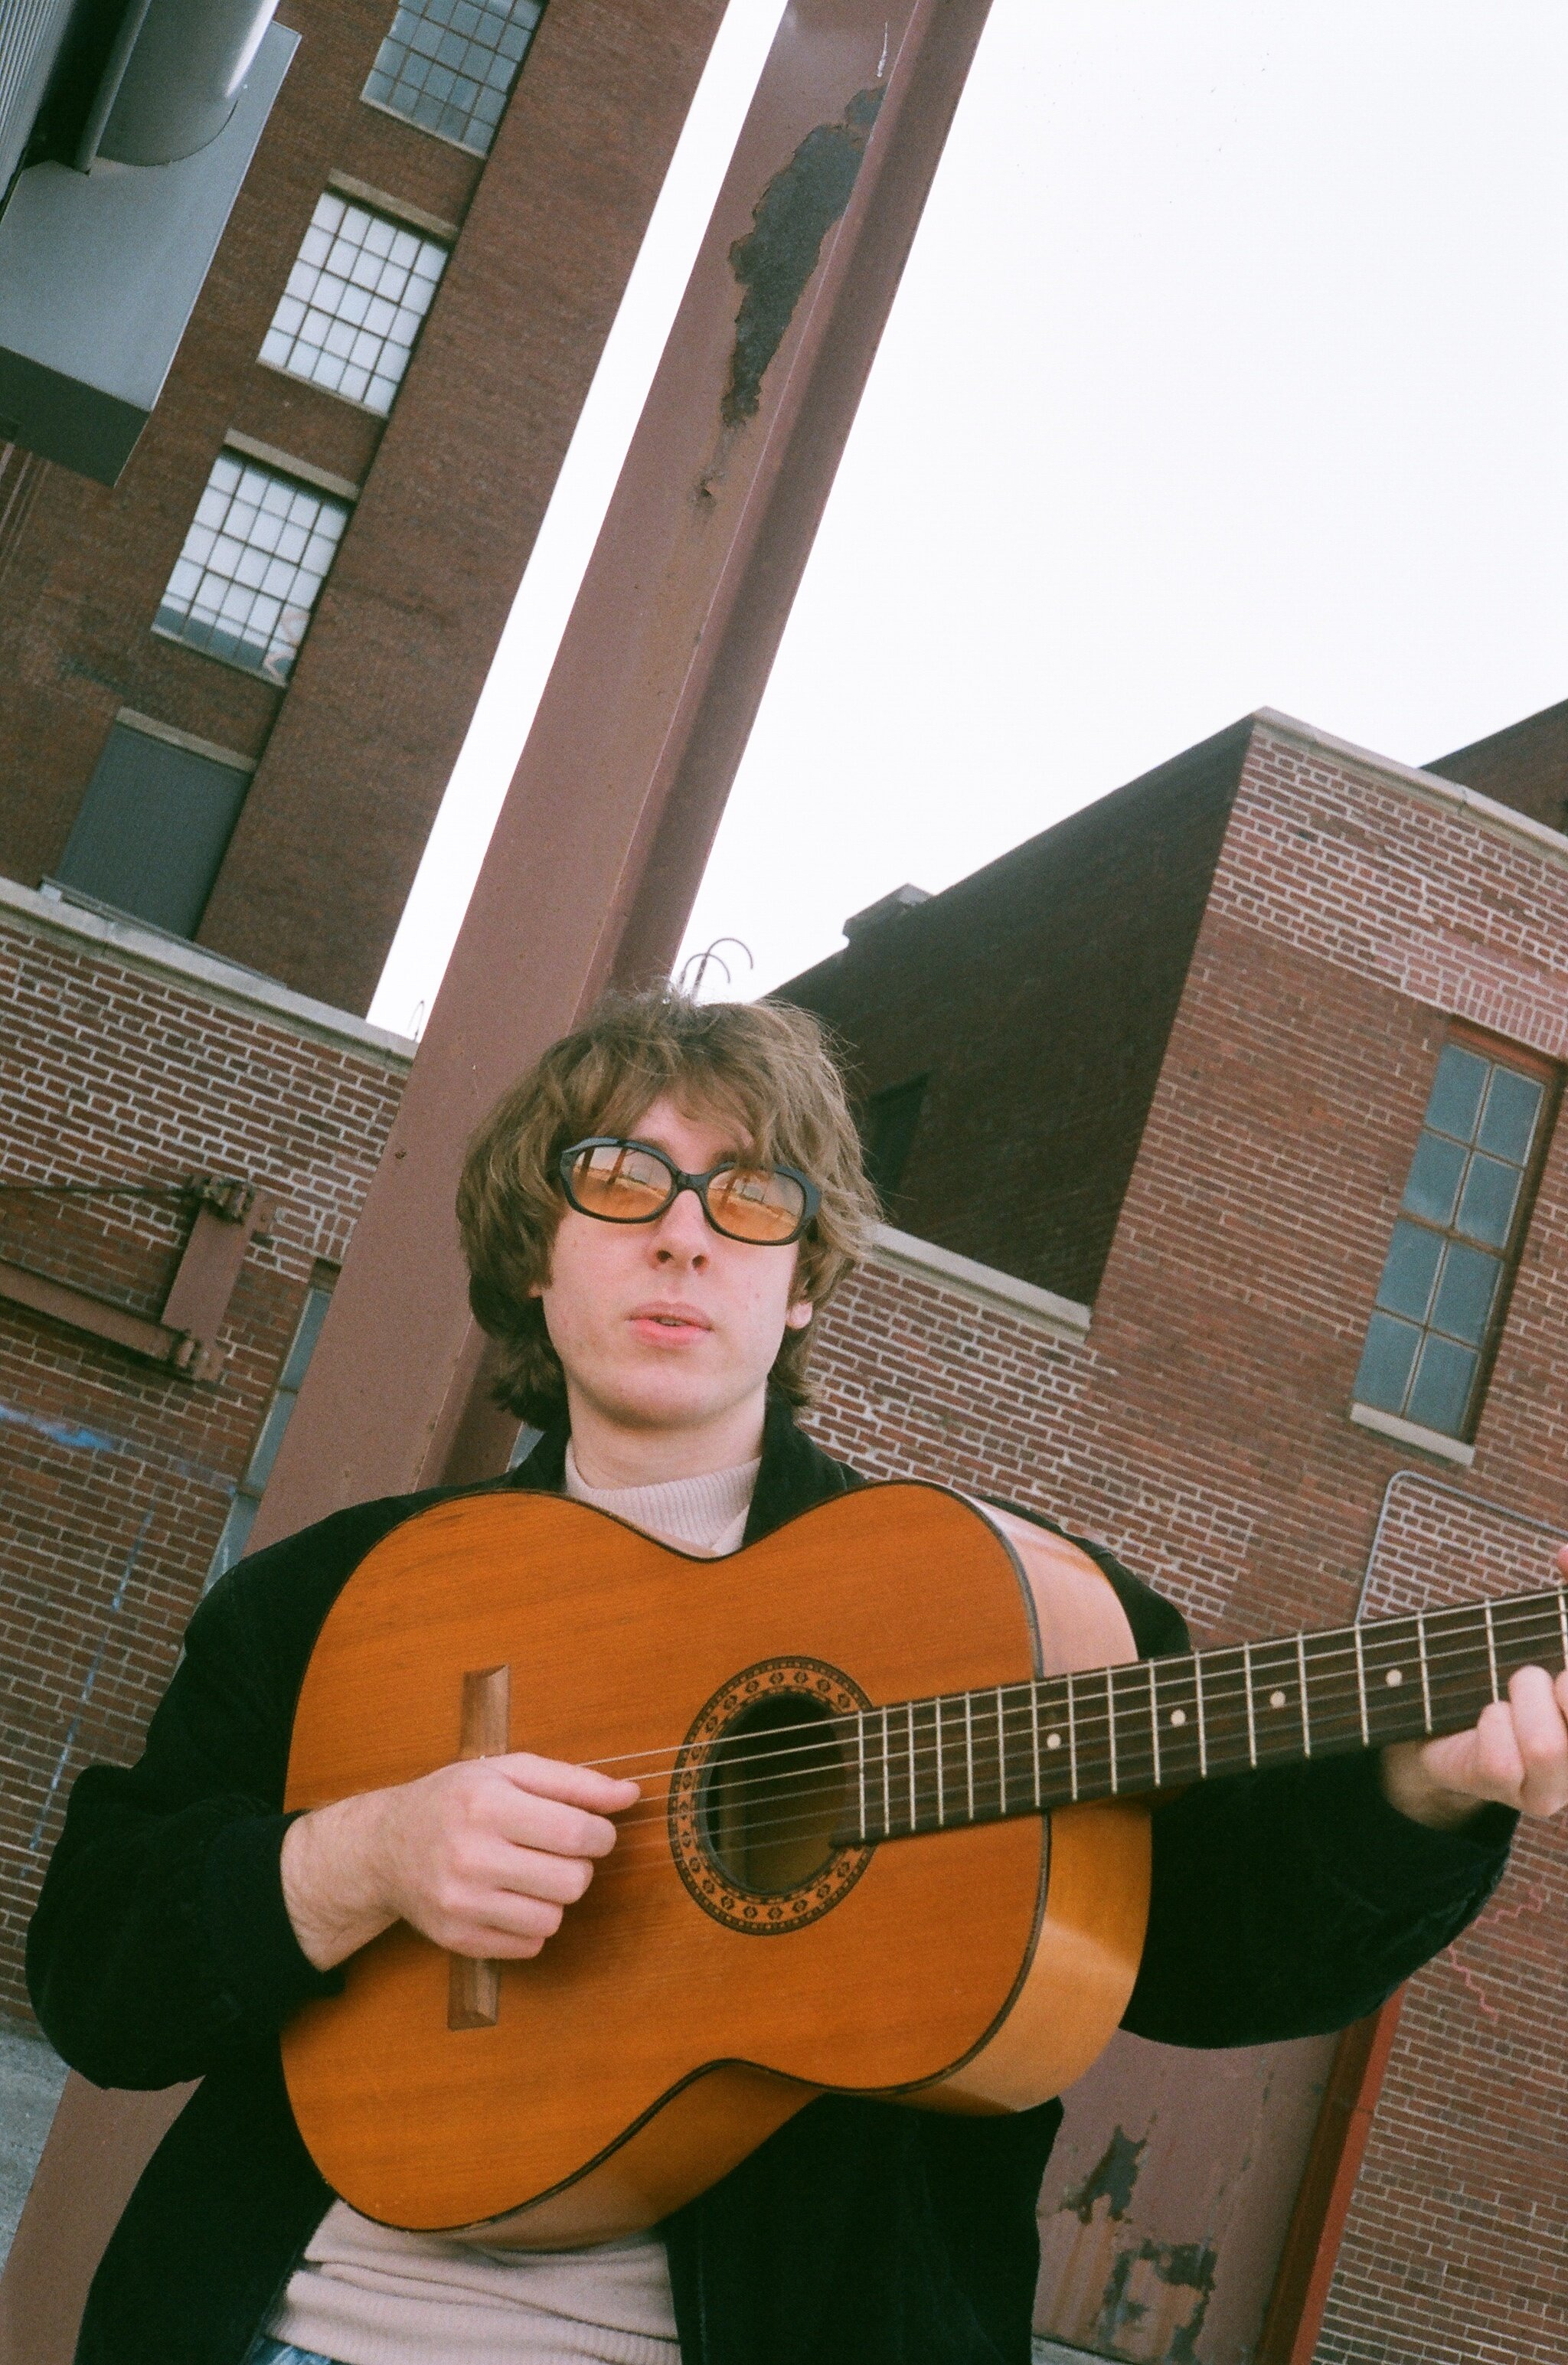  Alex Heaney’s Essential Forever for his debut album "There's A Lot Still to Say About Essential Forever" on Earth Libraries. 35mm film photography by Emma Collins 